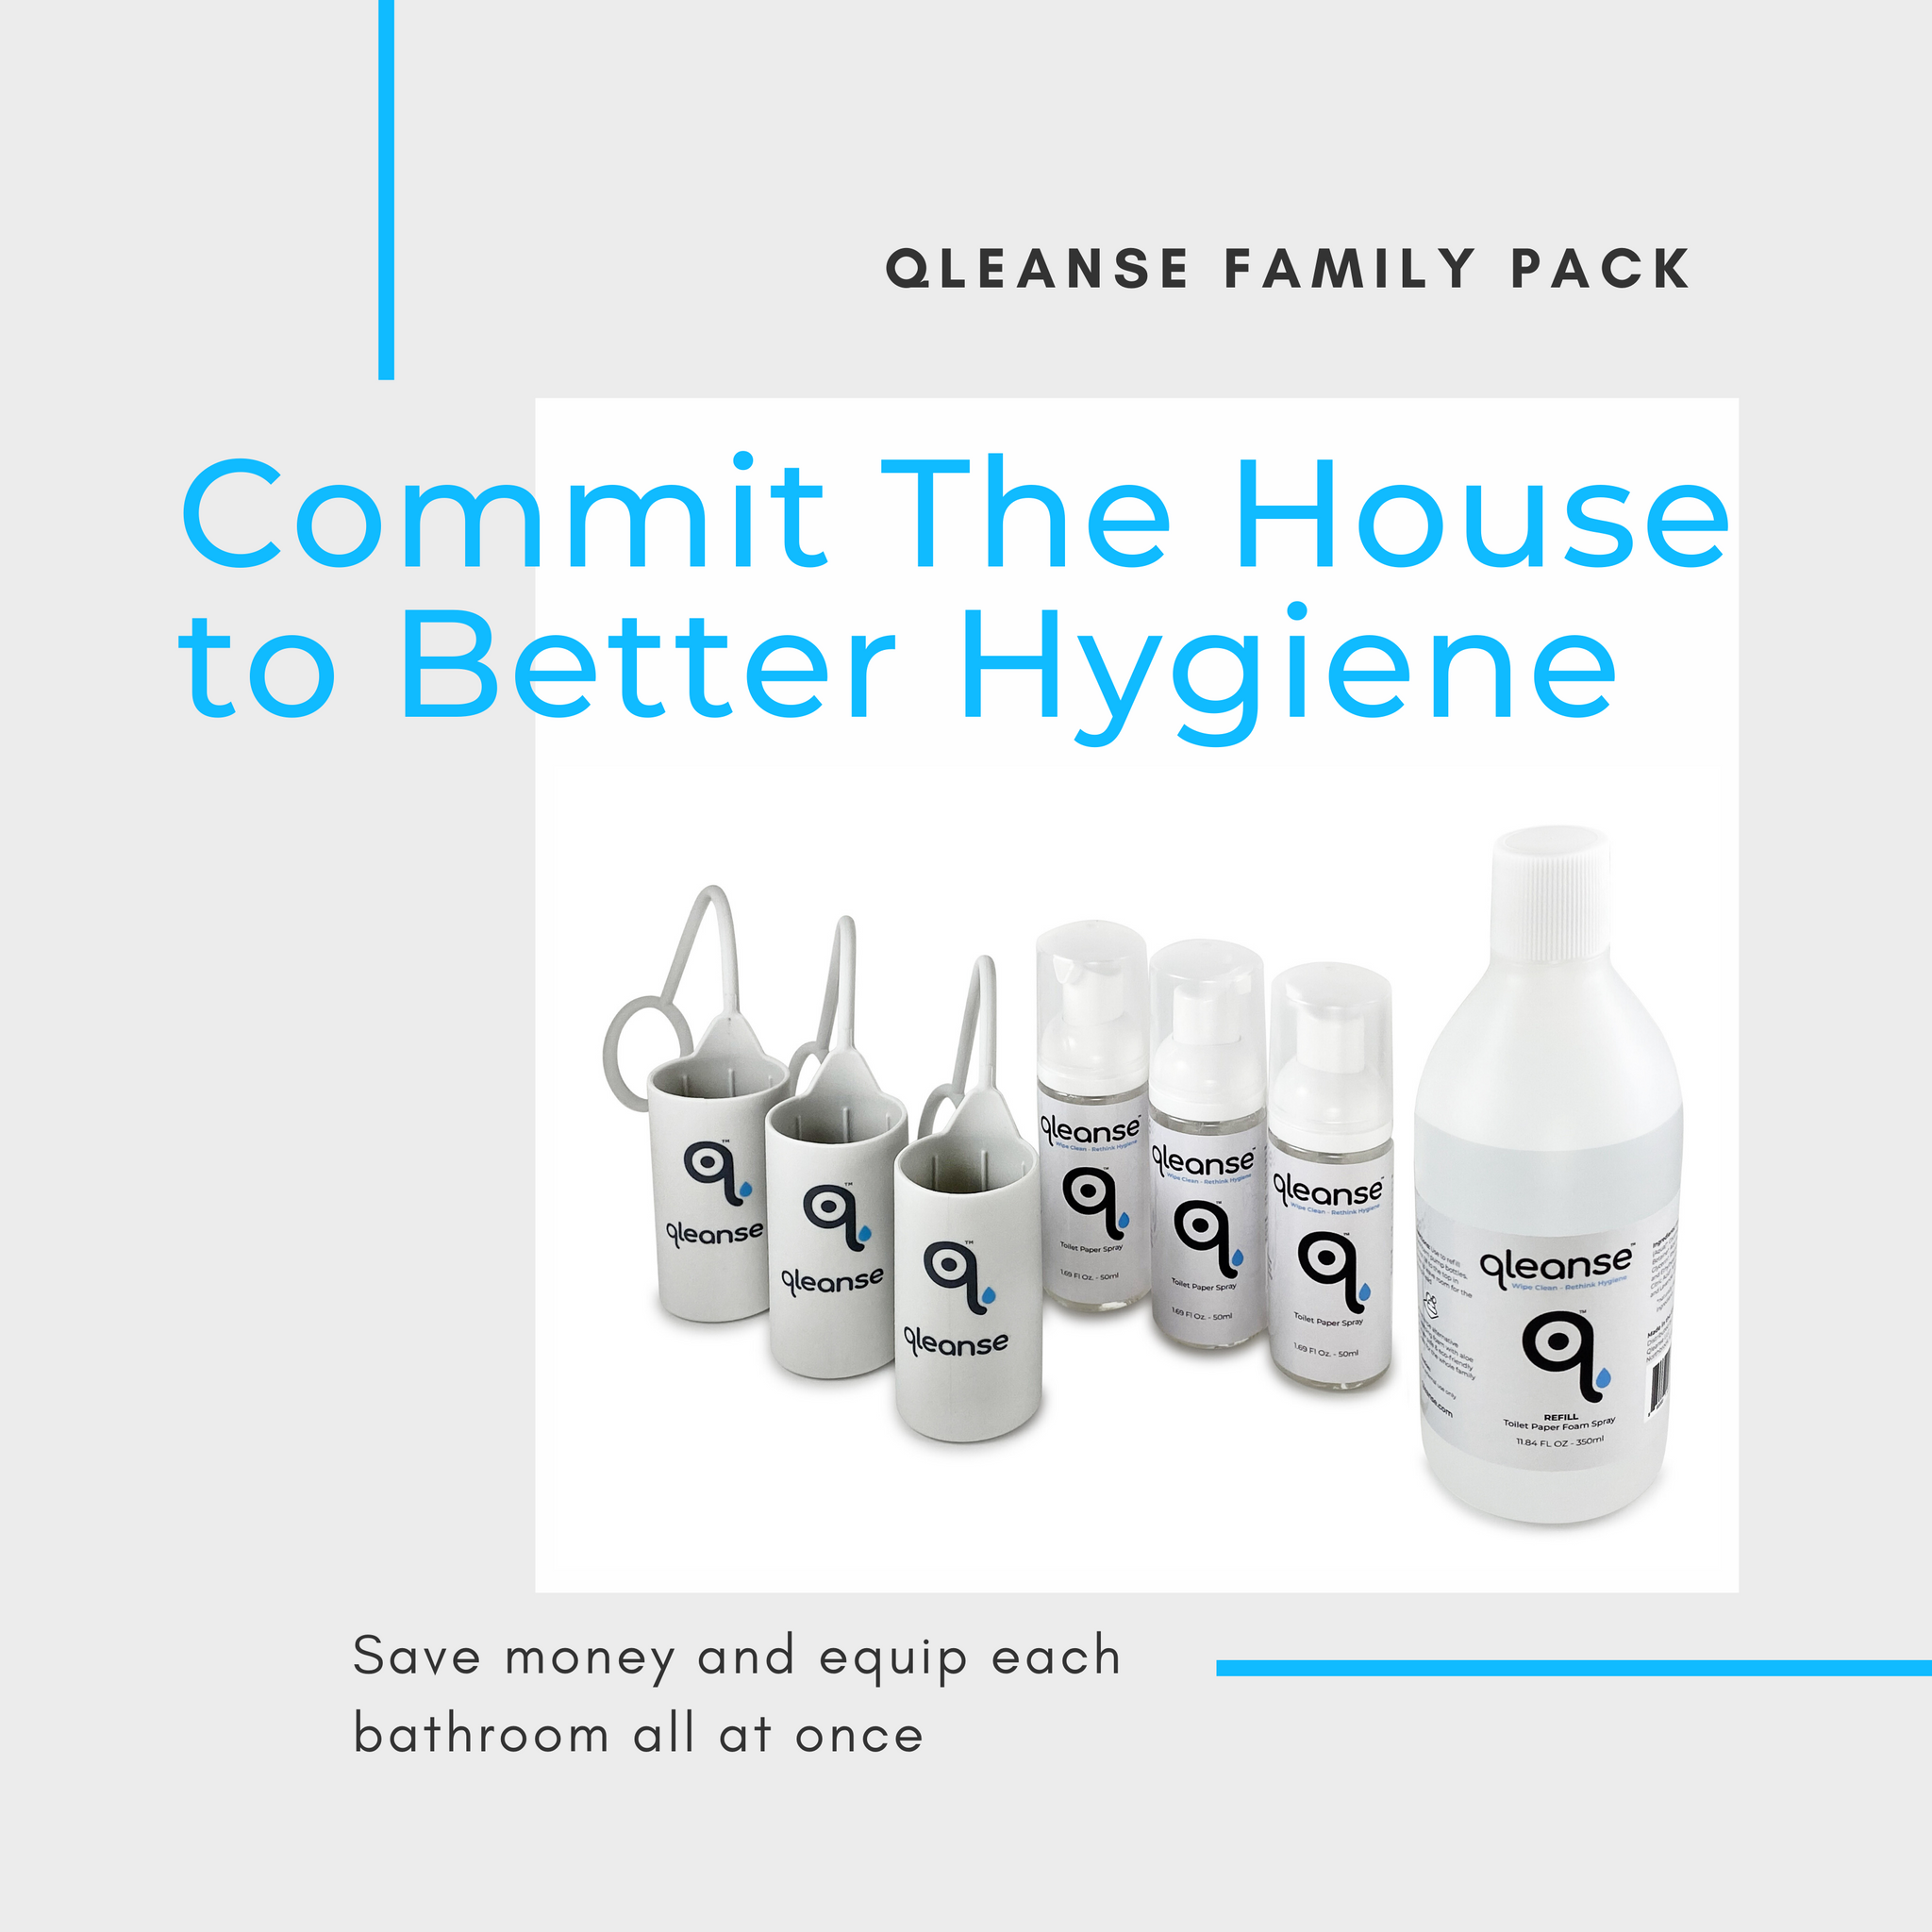 Qleanse Family Pack Toilet Paper Foam Spray and Caddy